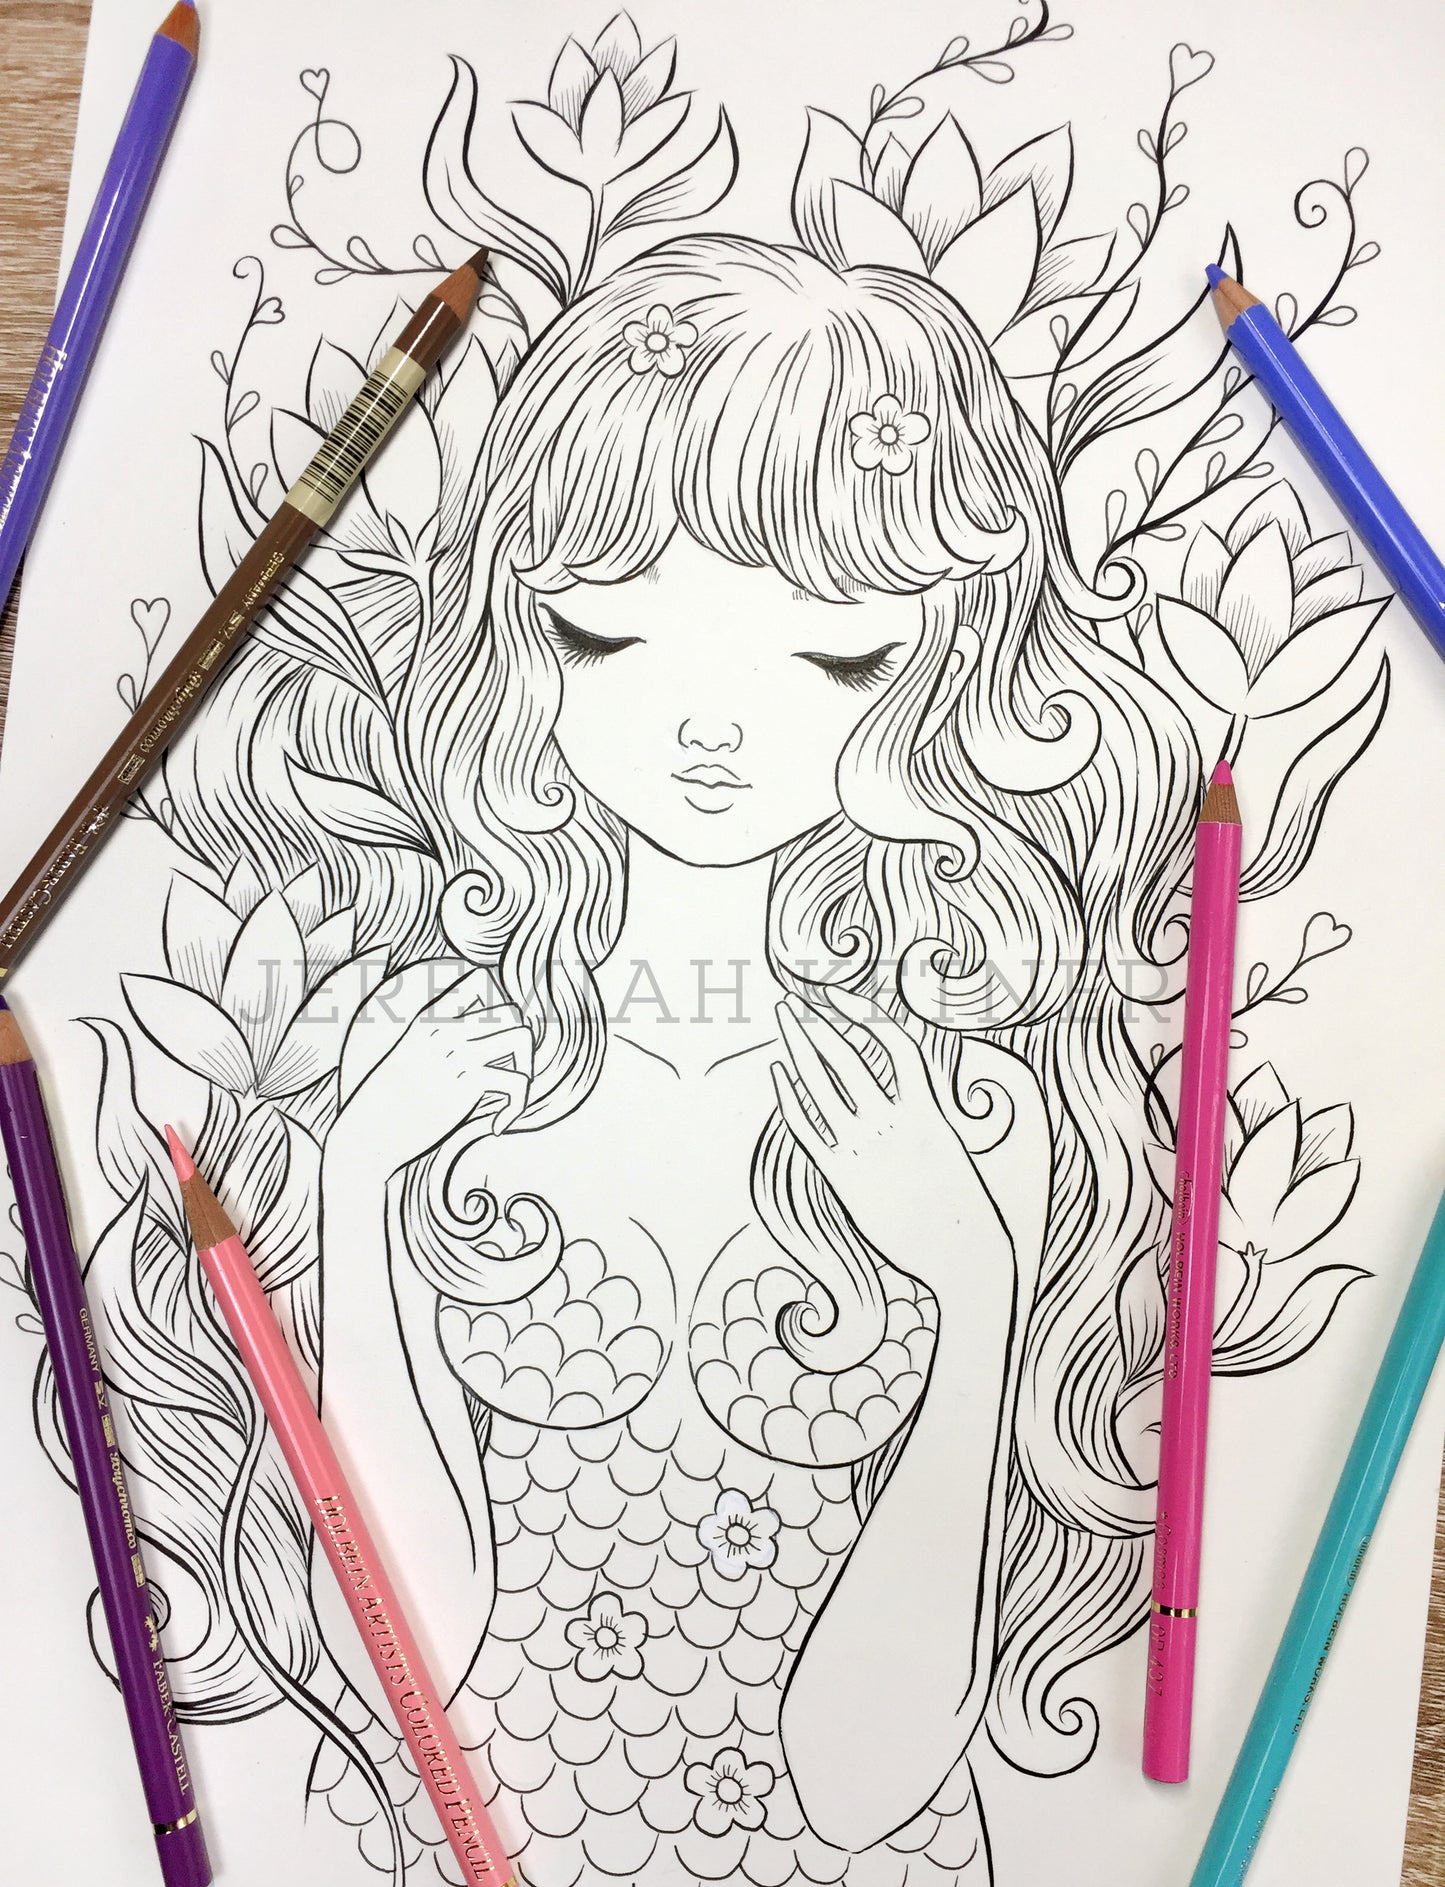 Golden Mermaid - Coloring Page by Jeremiah Ketner - Instant Download